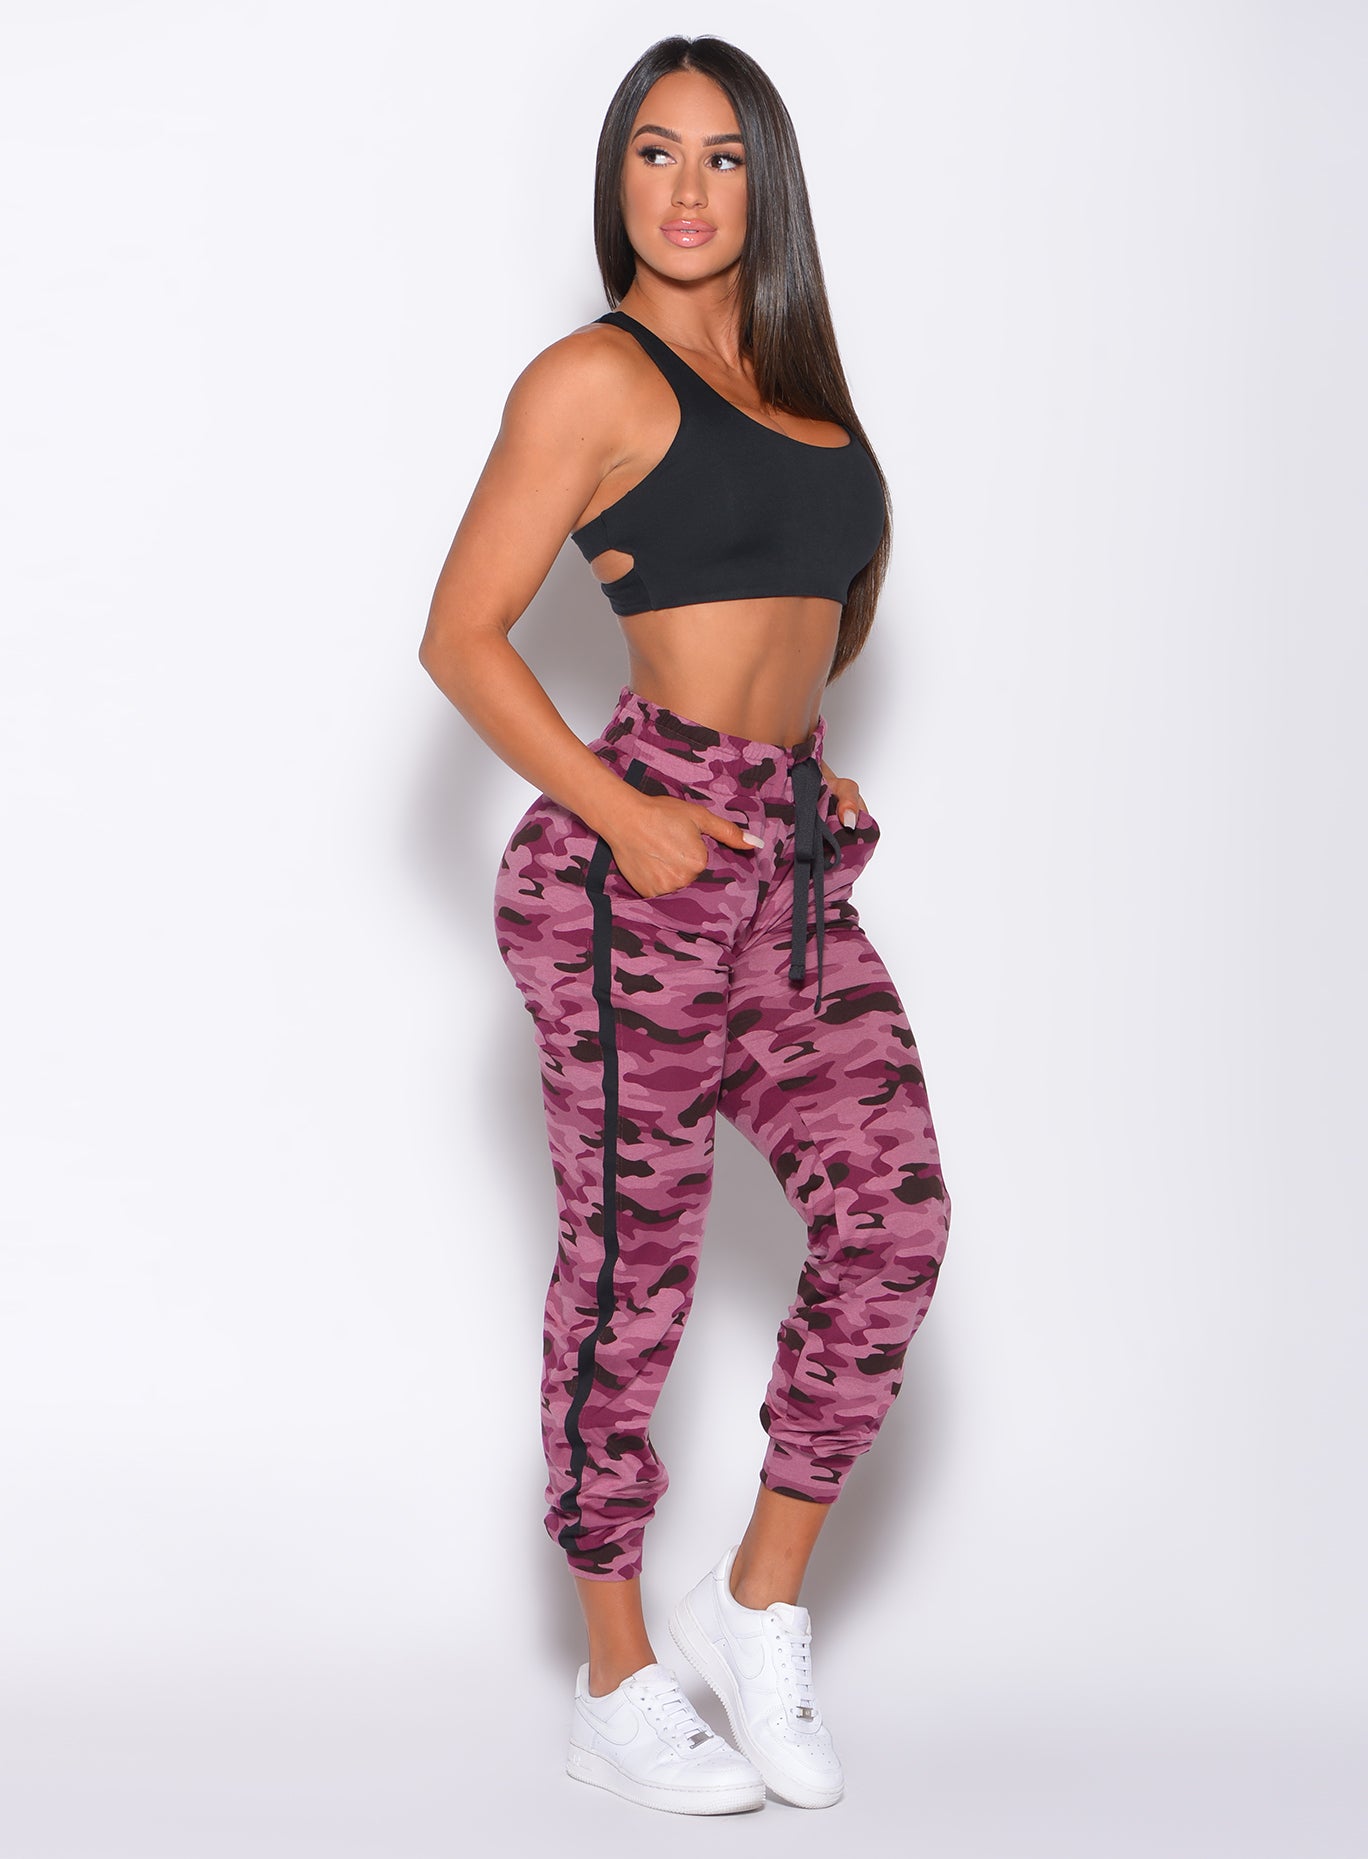 Right side  profile view of a model facing to her right wearing our dream joggers in Purple Power Camo color and a black bra 